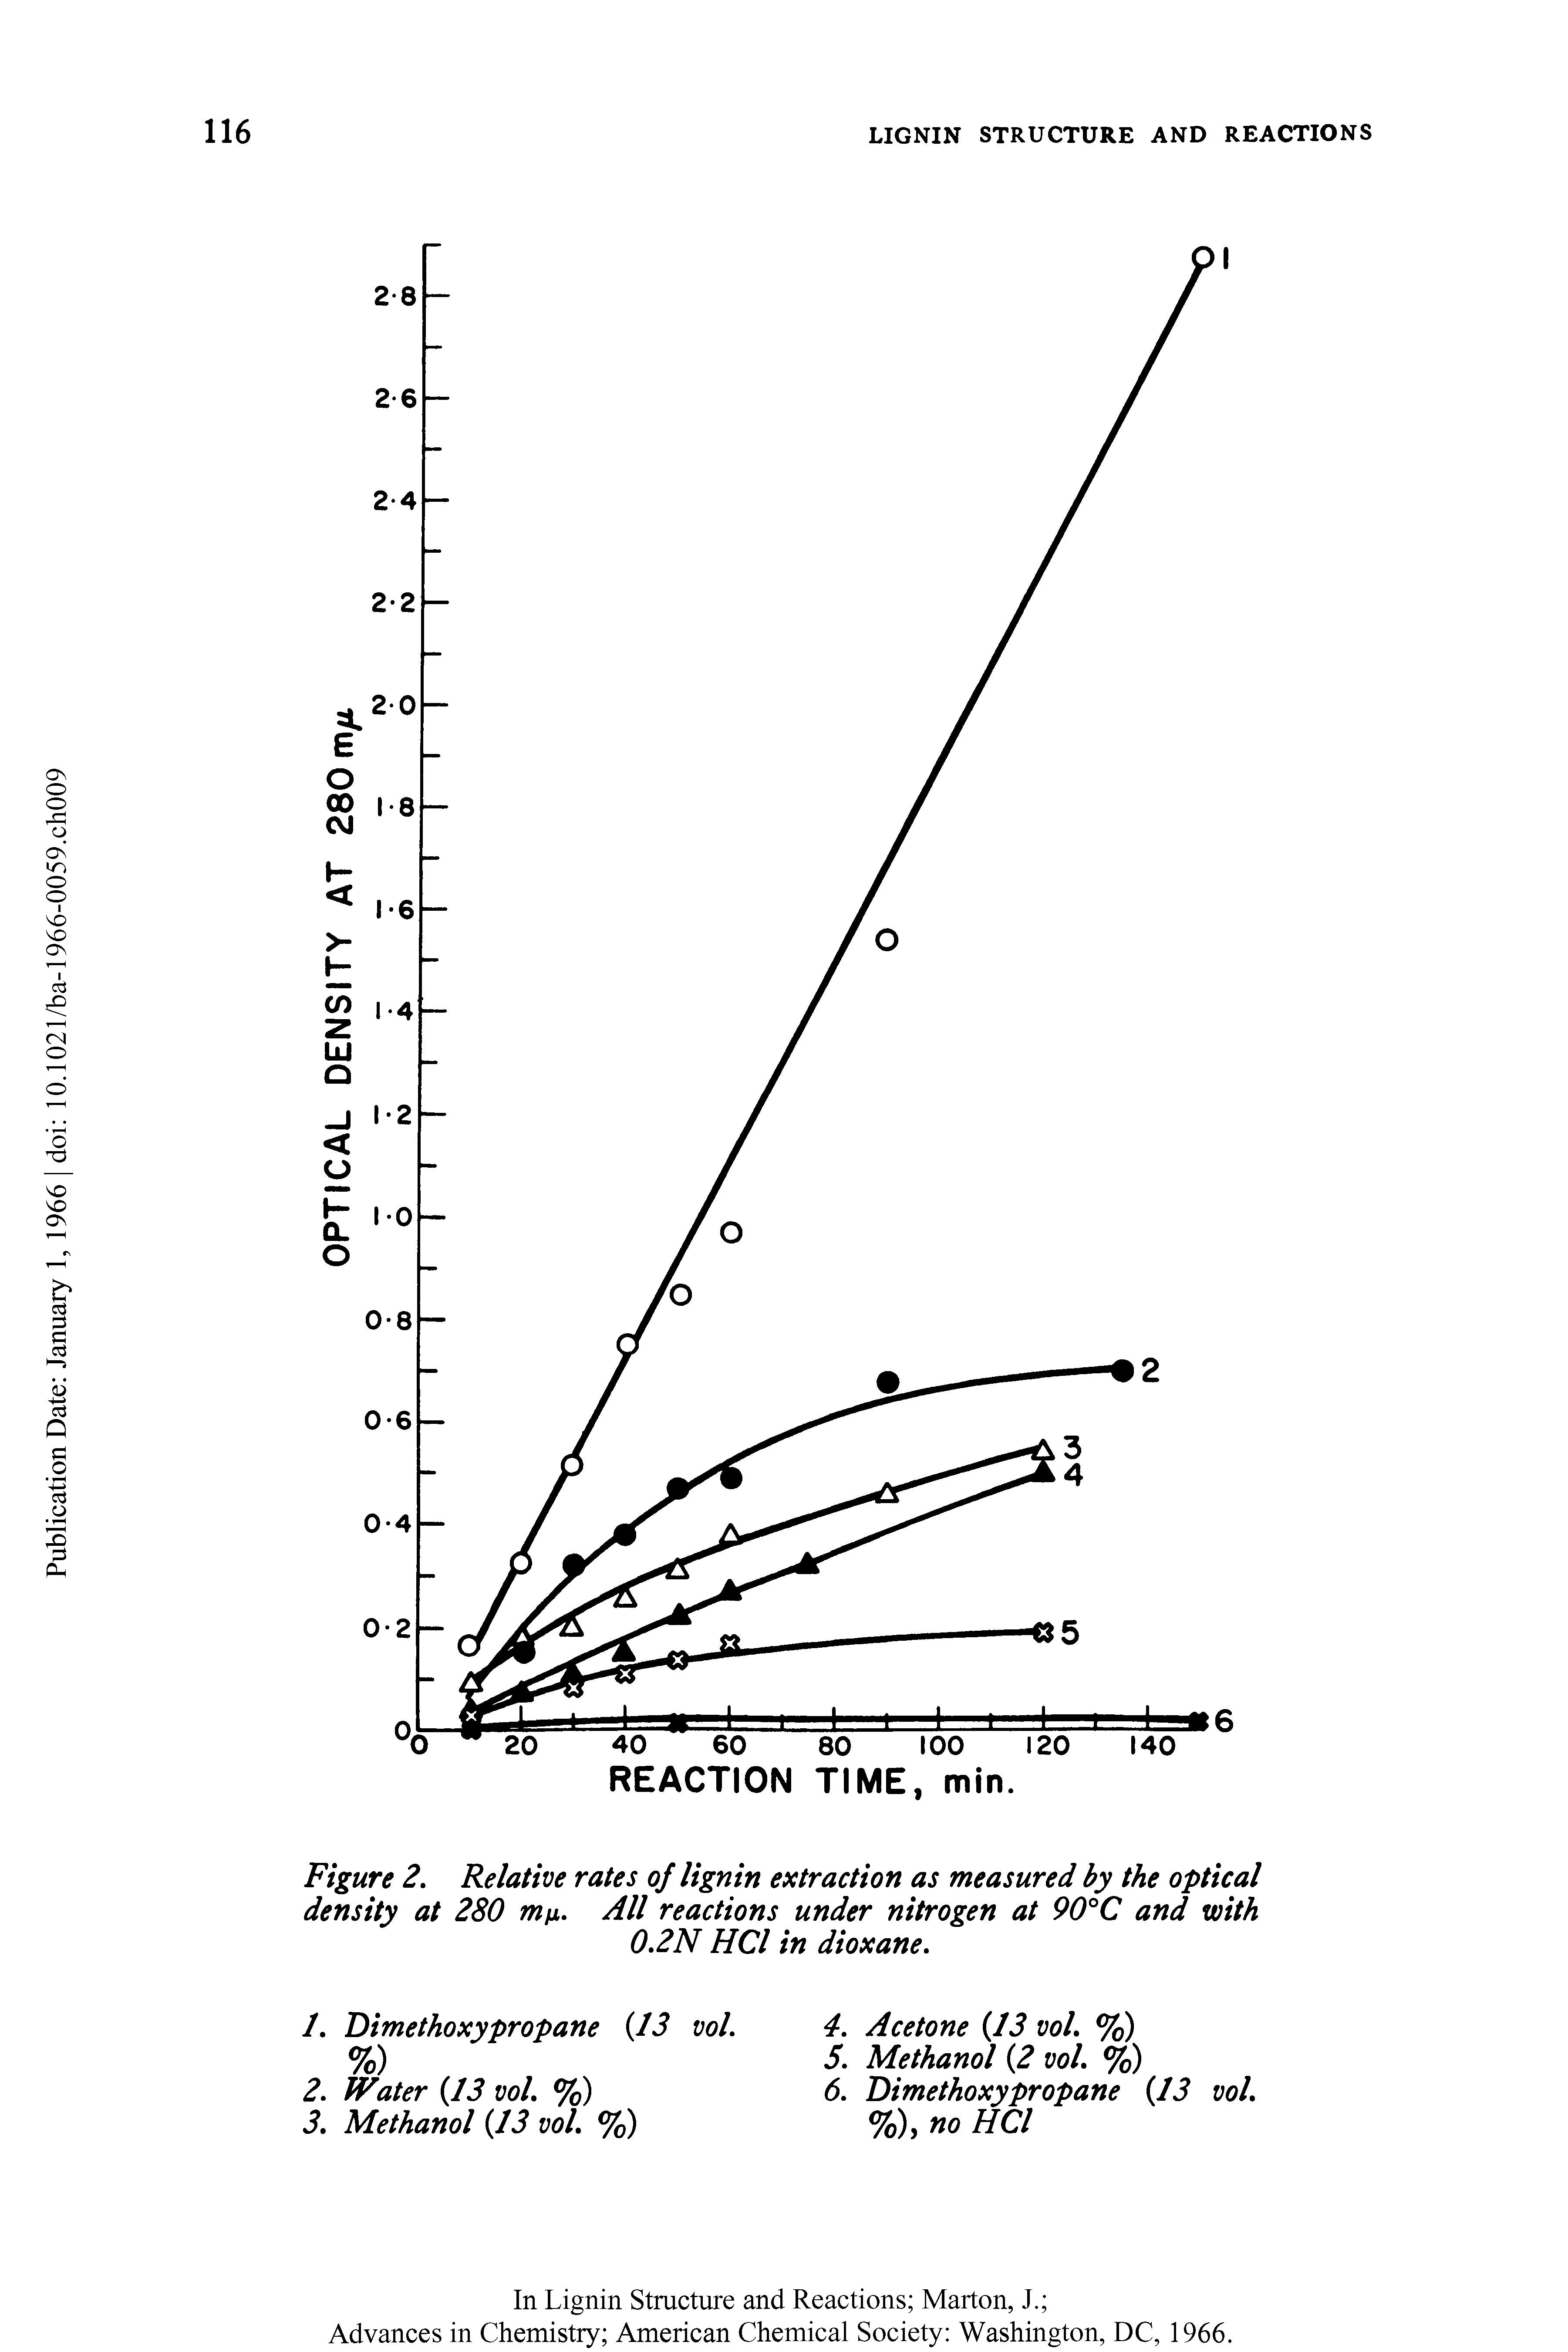 Figure 2. Relative rates of lignin extraction as measured by the optical density at 280 m i. All reactions under nitrogen at 90°C and with 0.2N HCl in dioxane.